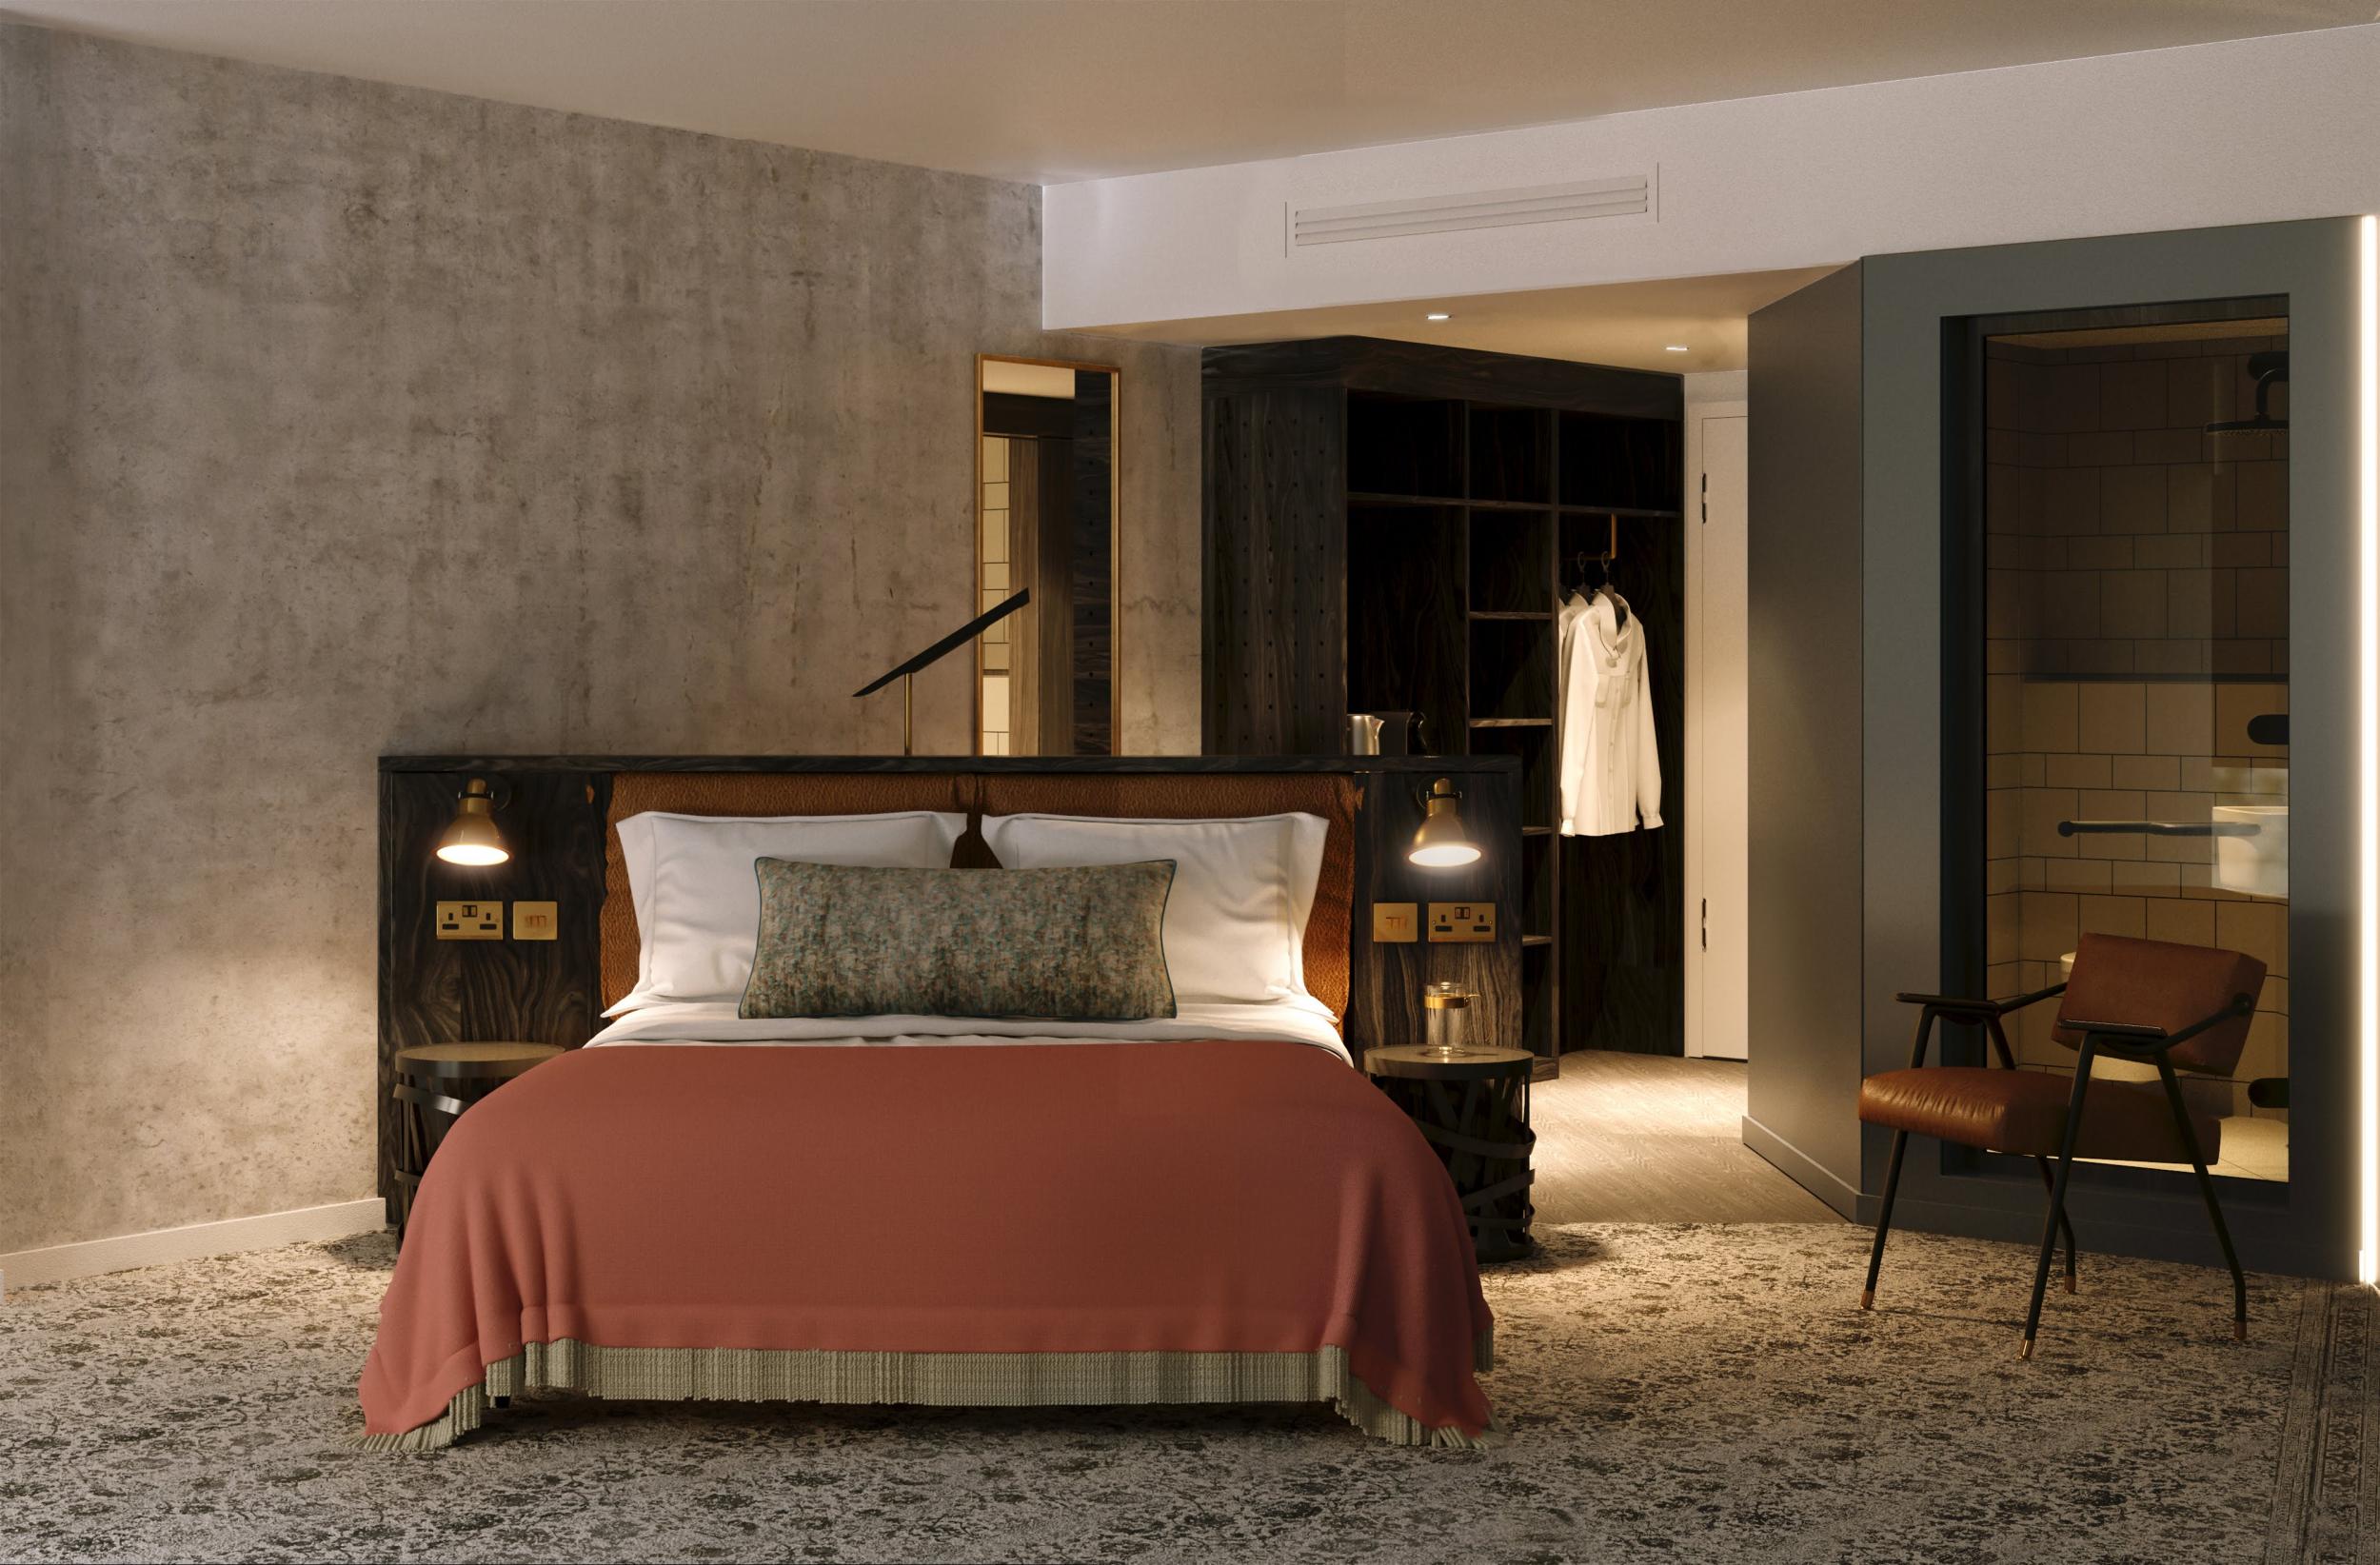 Hotel Brooklyn brings New York style to the UK